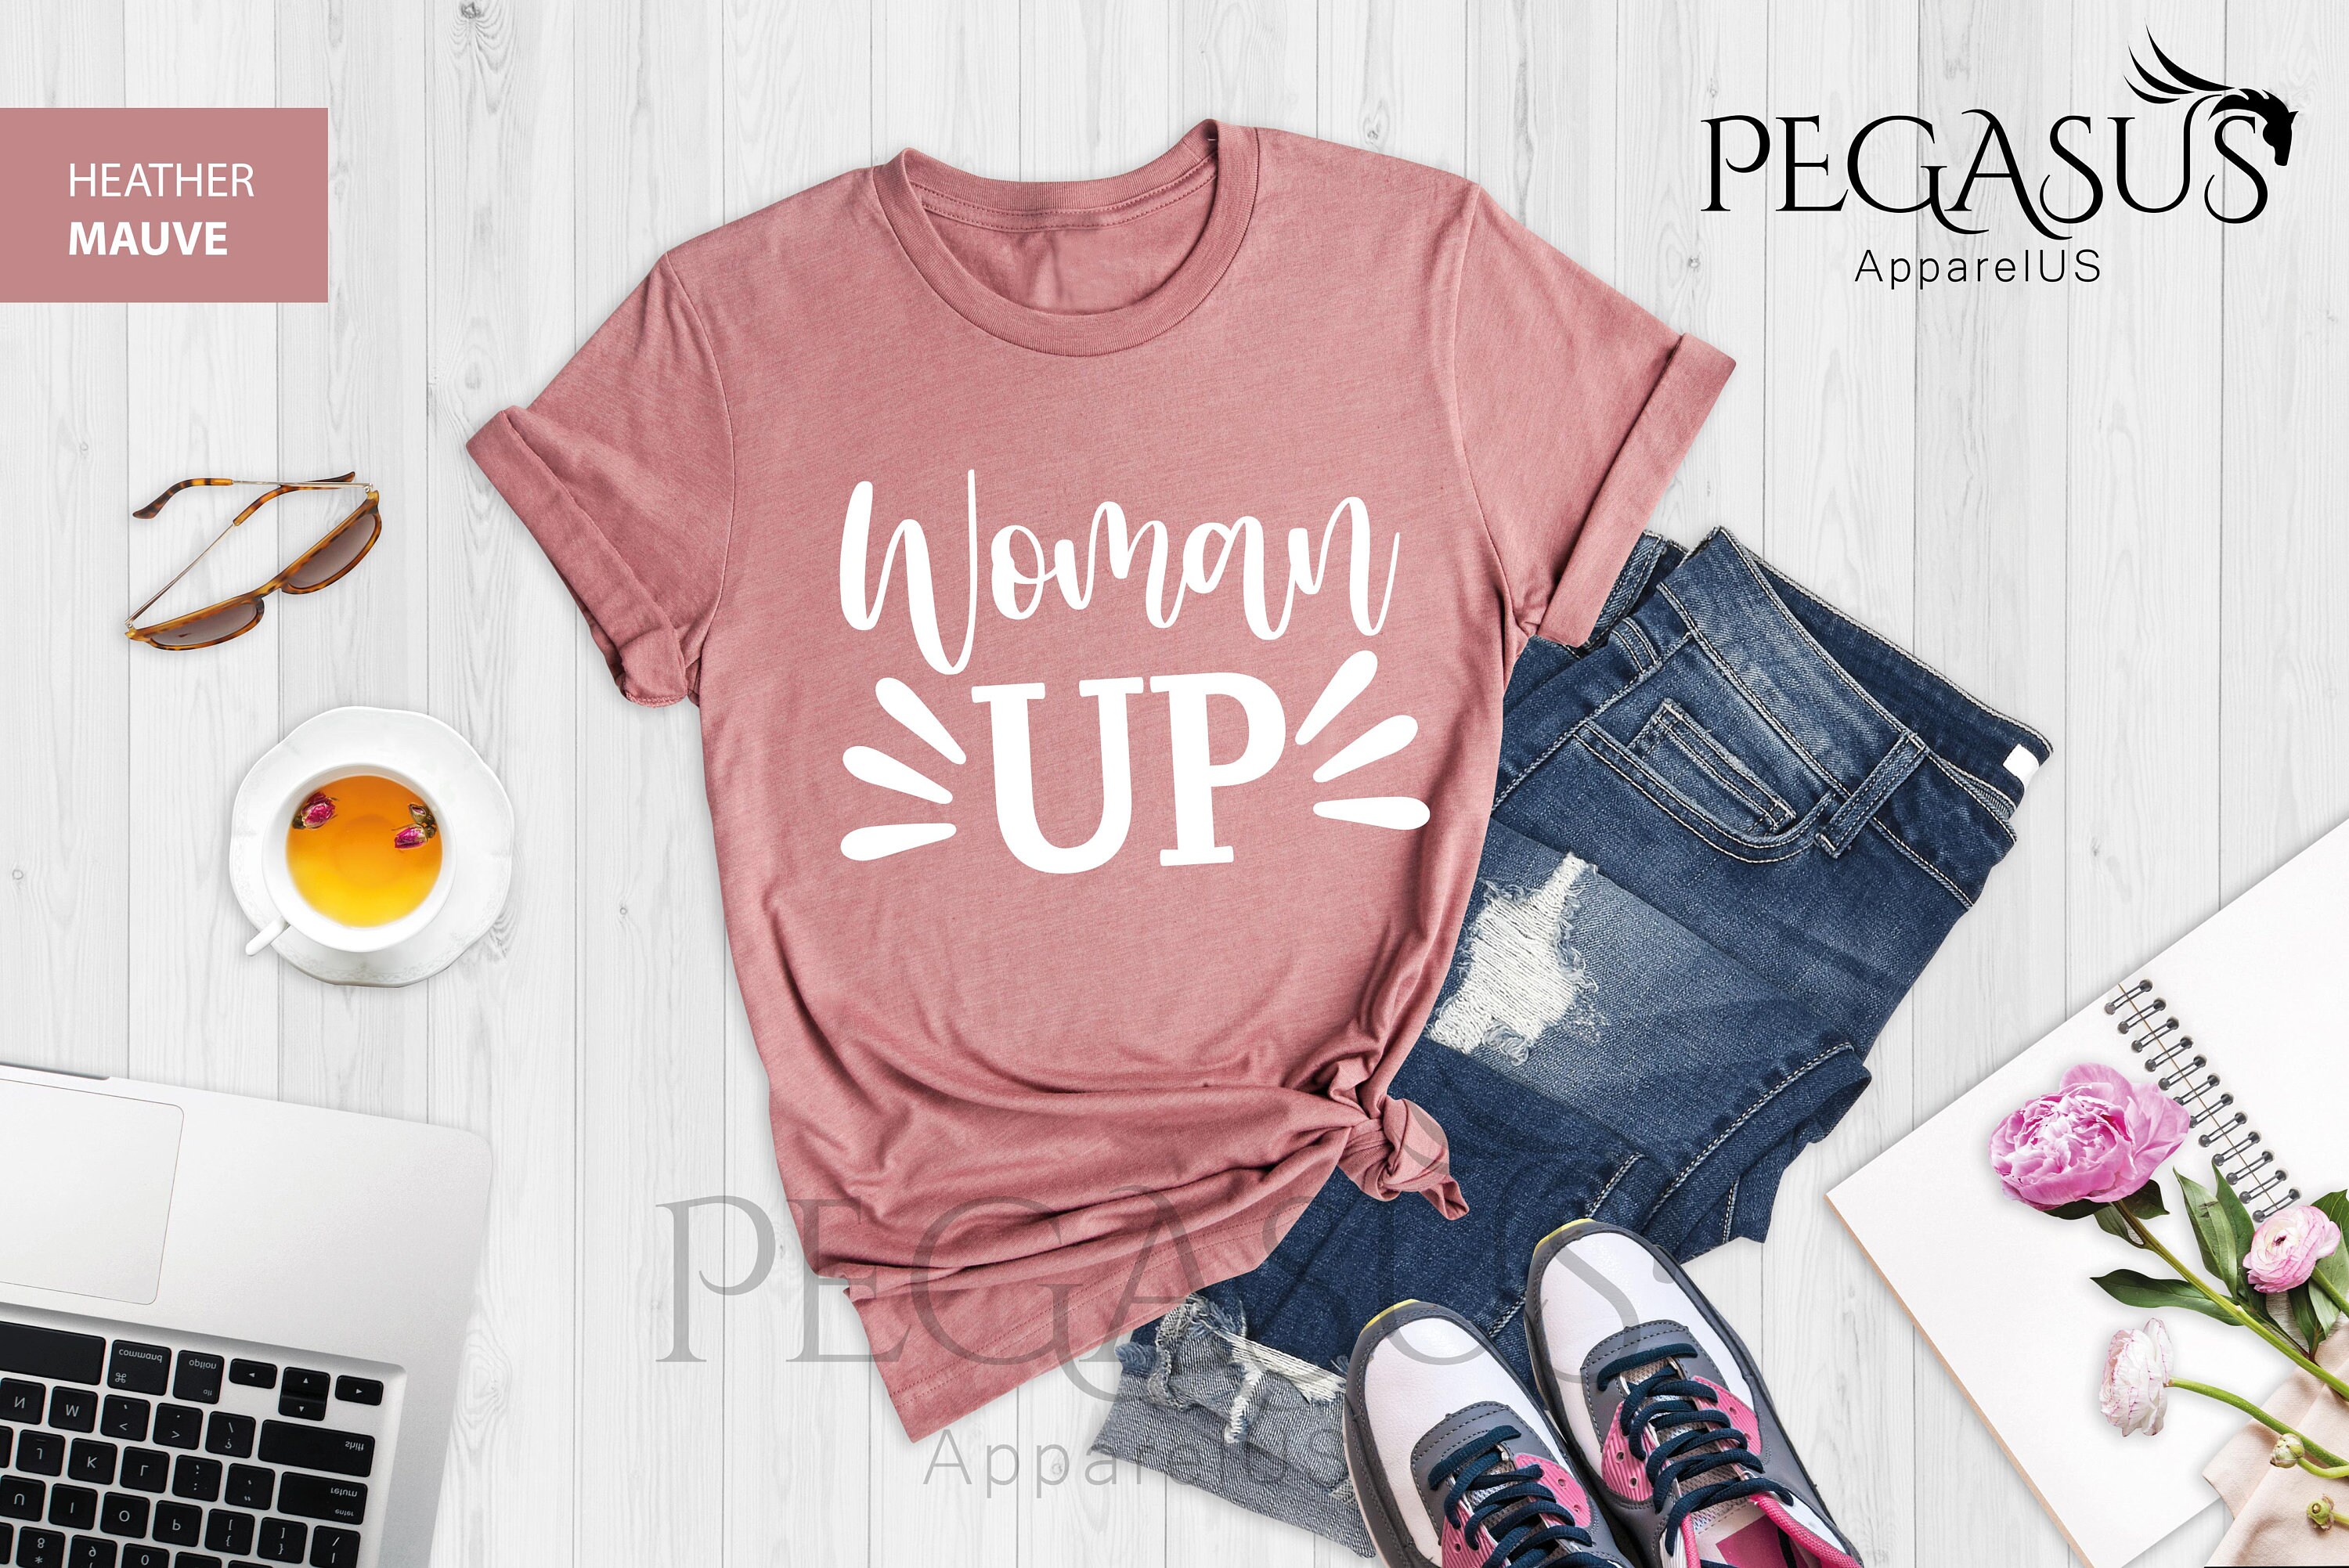 Discover Woman Up Shirt, Feminist Shirt, Womens Empowerment, She Believed She Could So She Did, Girl Power, Fierce Female Shirt, Gift for Daughter